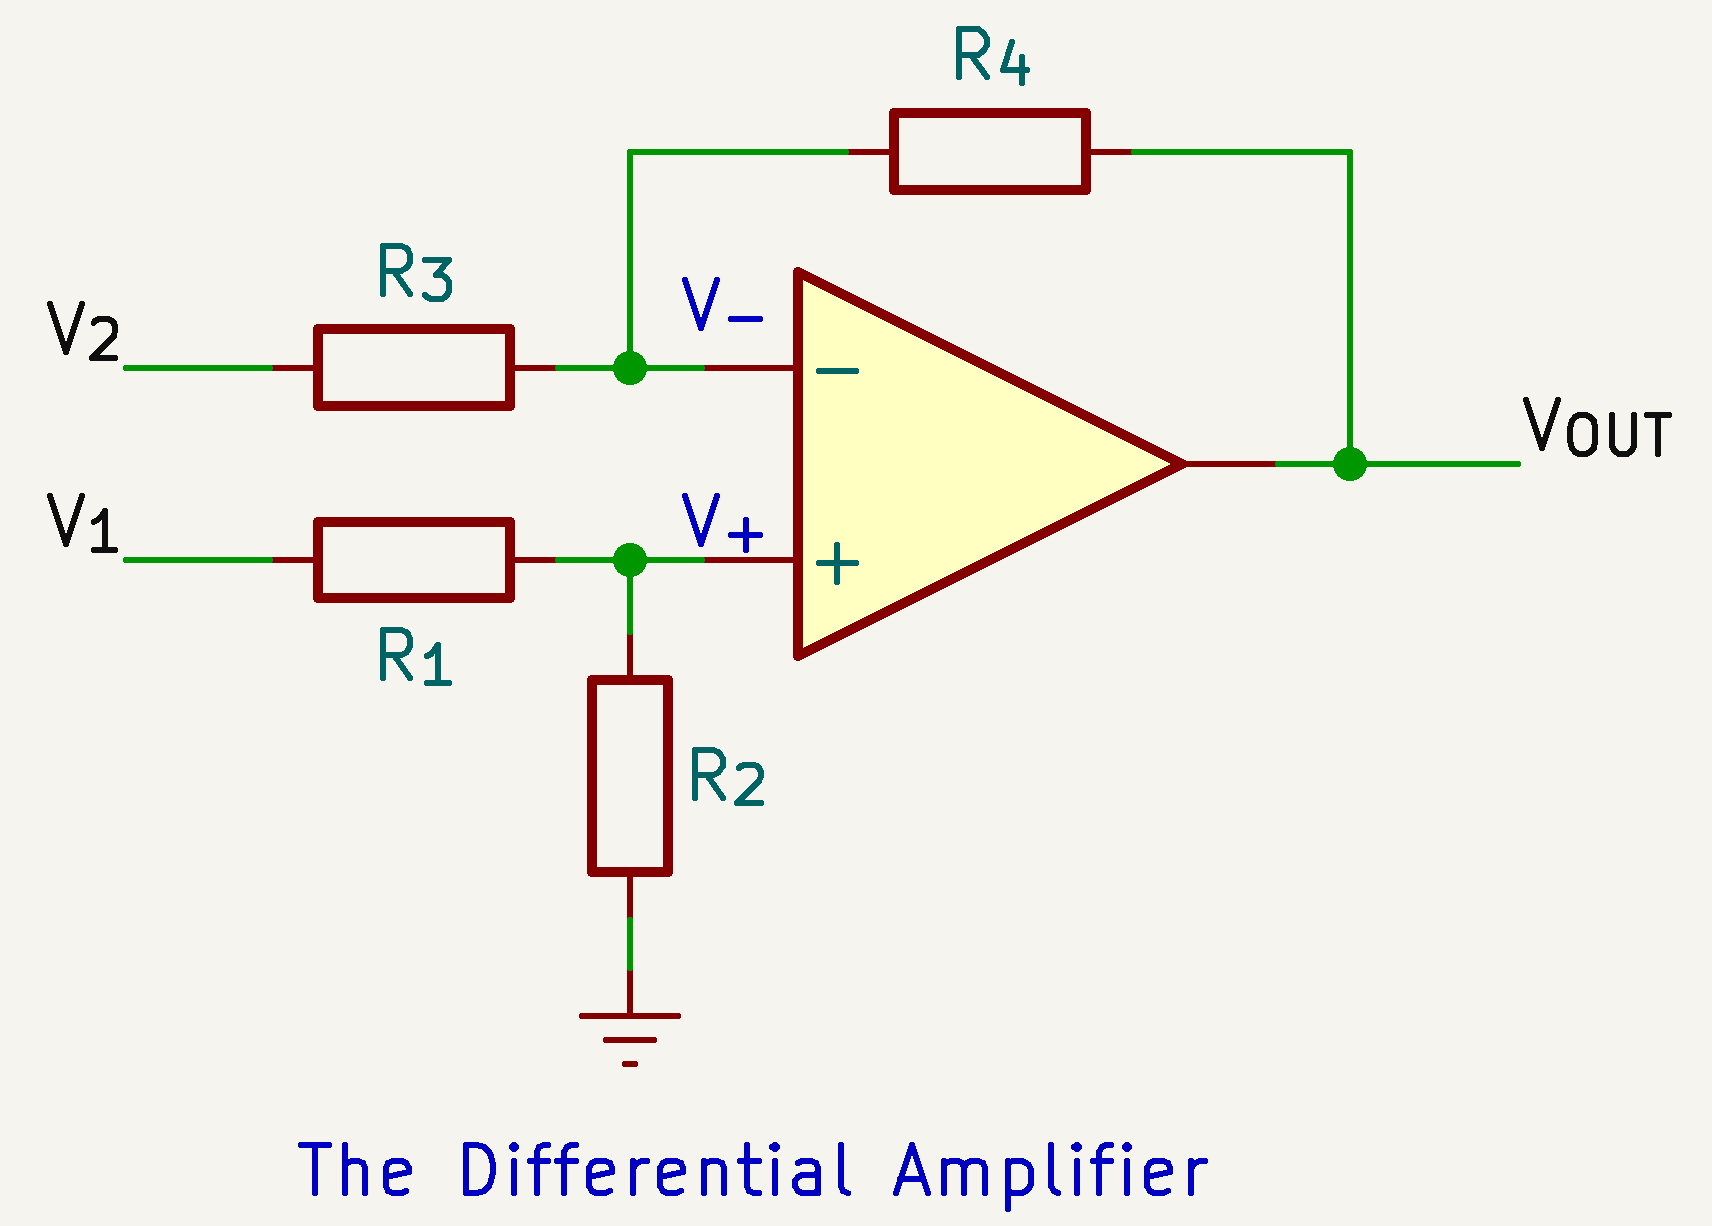 The Differential Amplifier